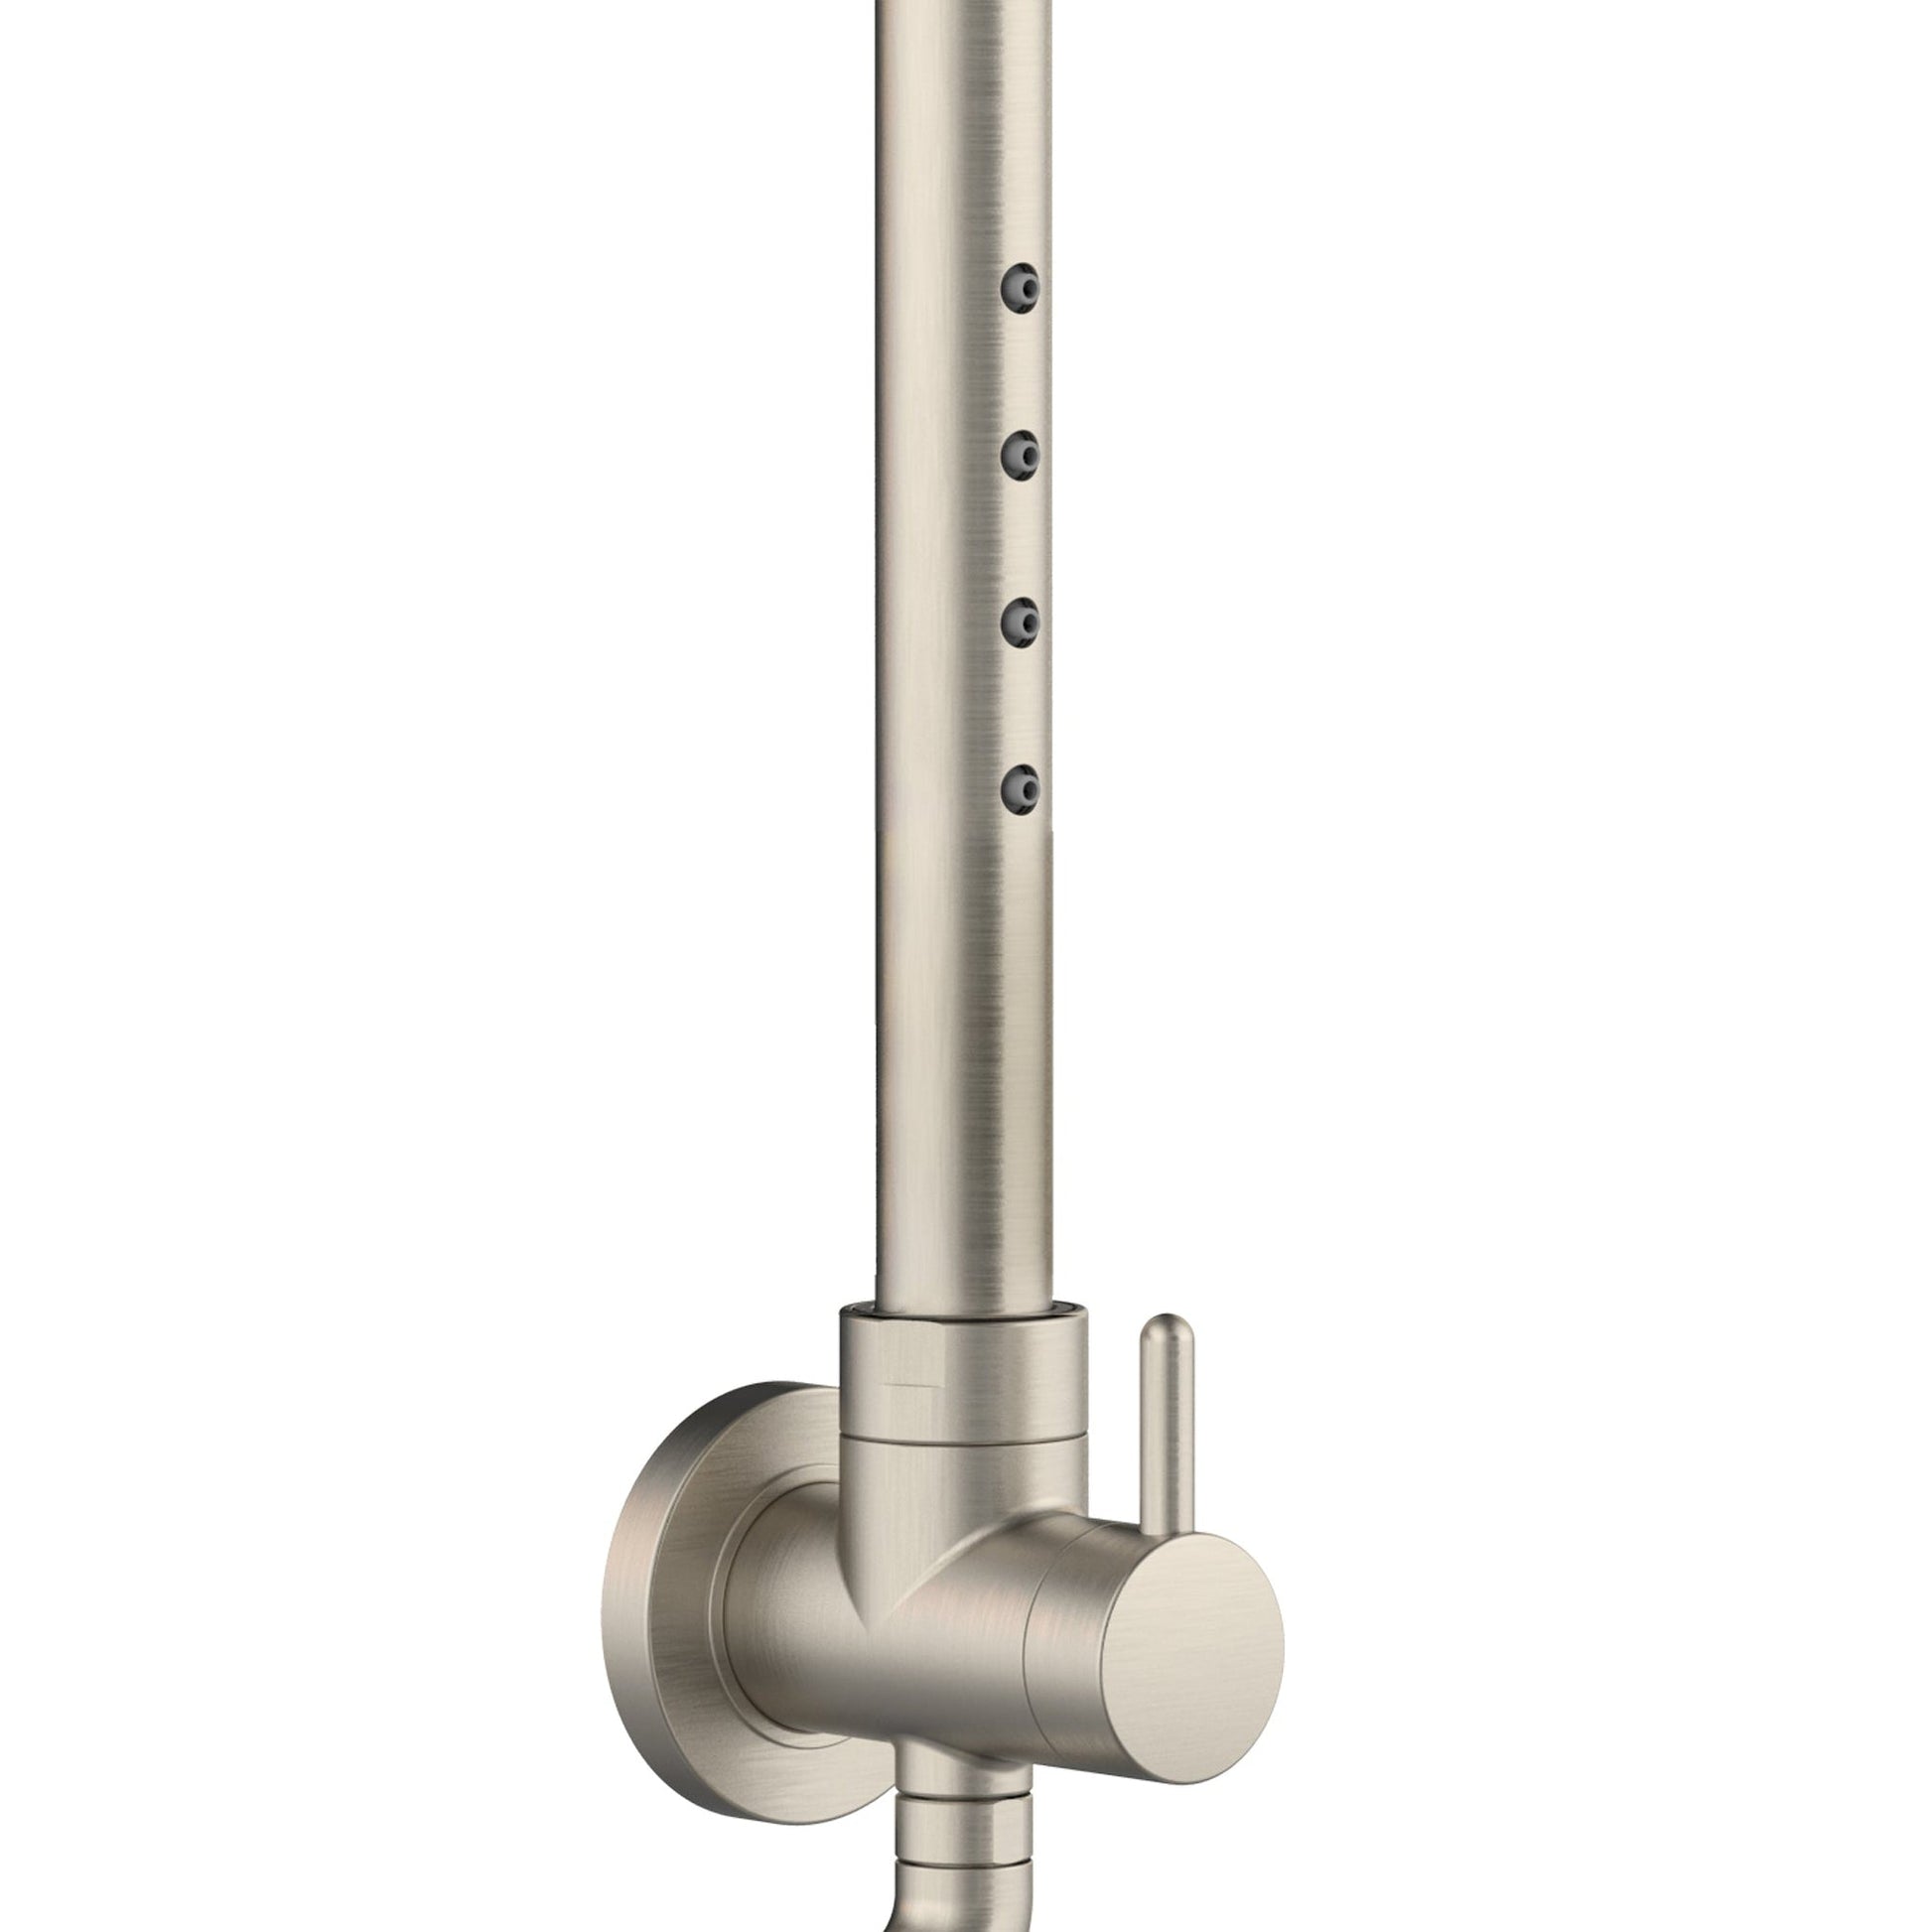 PULSE ShowerSpas Atlantis 1.8 GPM Rain Shower System in Brushed Nickel Finish With 5-Power Nozzle Spray and Single Function Hand Shower